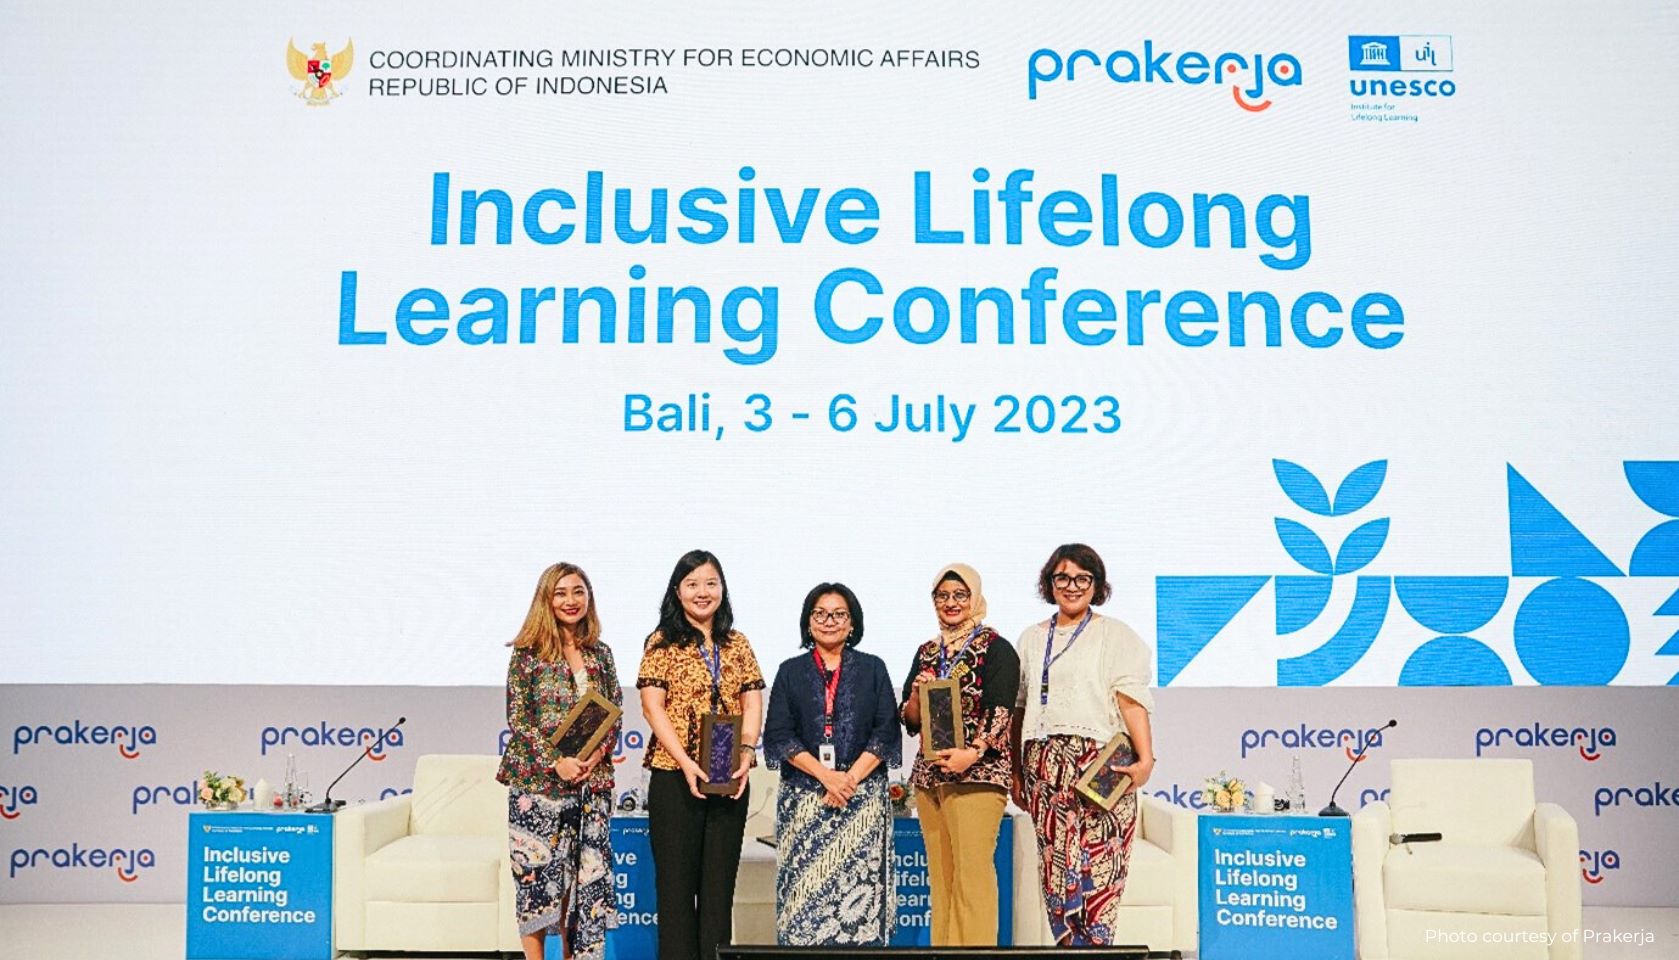 Ms. Tessa Wijaya, COO and Co-founder of Xendit; Ms. Annie An Dongmei, senior solutions architect of Amazon Web Services; Ms. Denni Puspa Purbasari, Executive Director of PMO Prakerja; Ms.Dian Siswarini, CEO of PT XL Axiata; and Ms. Dwi Faiz, Head of Programmes UN Women Indonesia, joined online by Ms. Kanta Singh, Deputy Country Representative, UN Women India, presented their insights and experiences on Women in Technology in the Inclusive Lifelong Learning Conference, held in Bali, Indonesia, on 3 July 2023